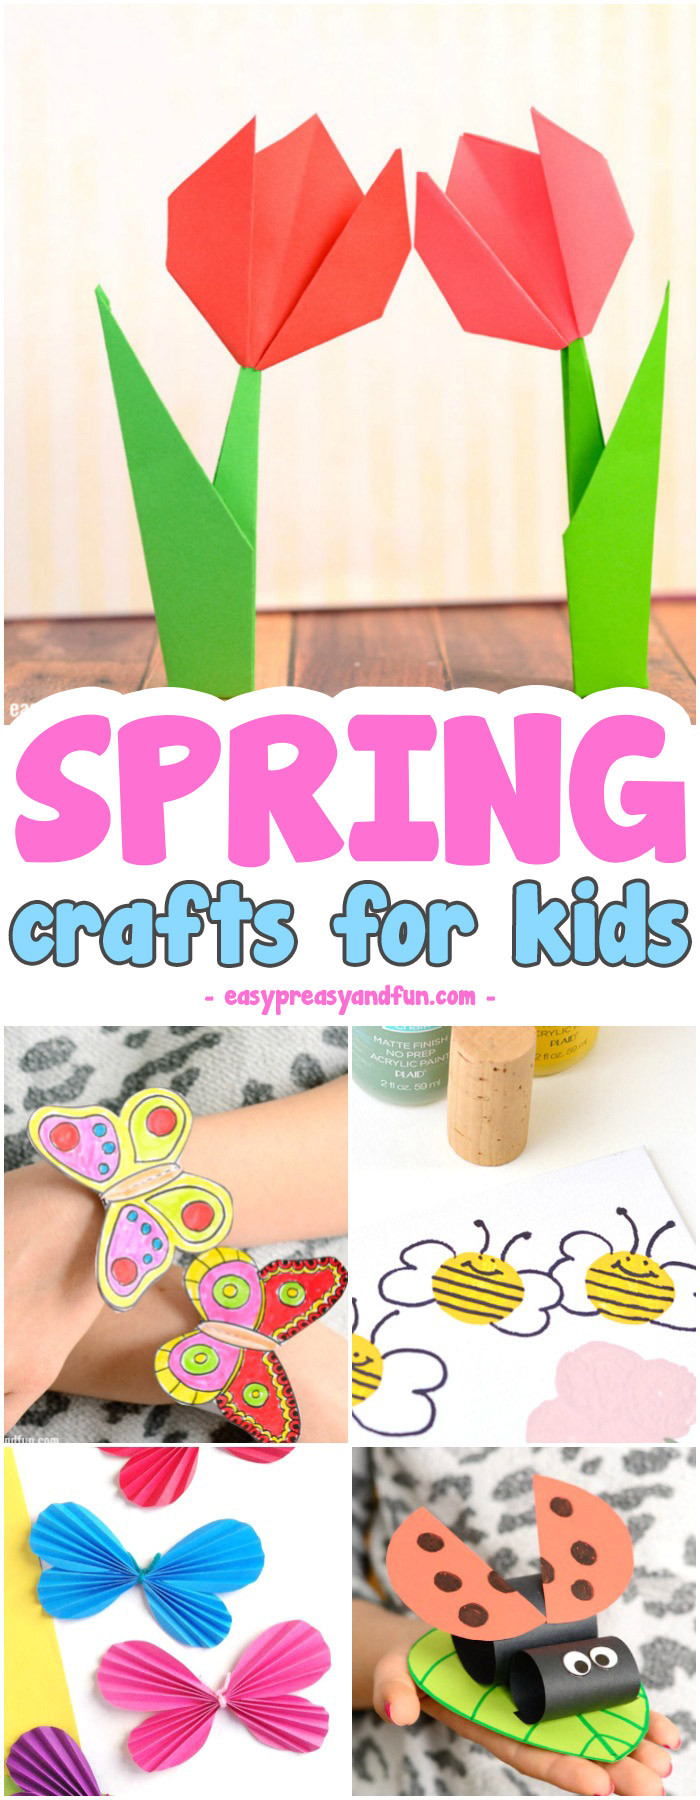 Art Crafts For Toddlers
 Spring Crafts for Kids Art and Craft Project Ideas for